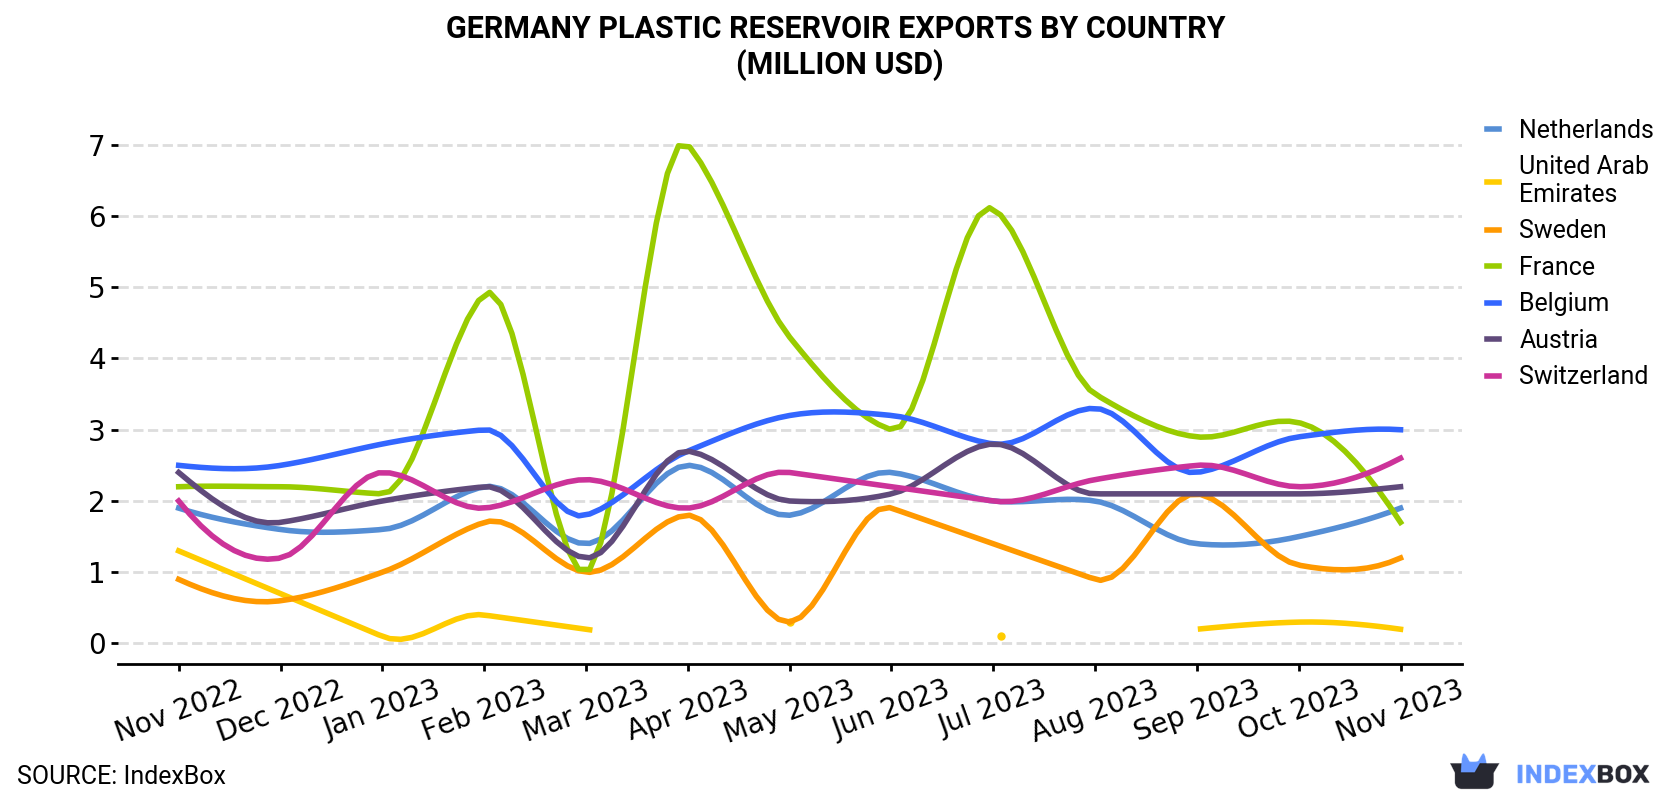 Germany Plastic Reservoir Exports By Country (Million USD)